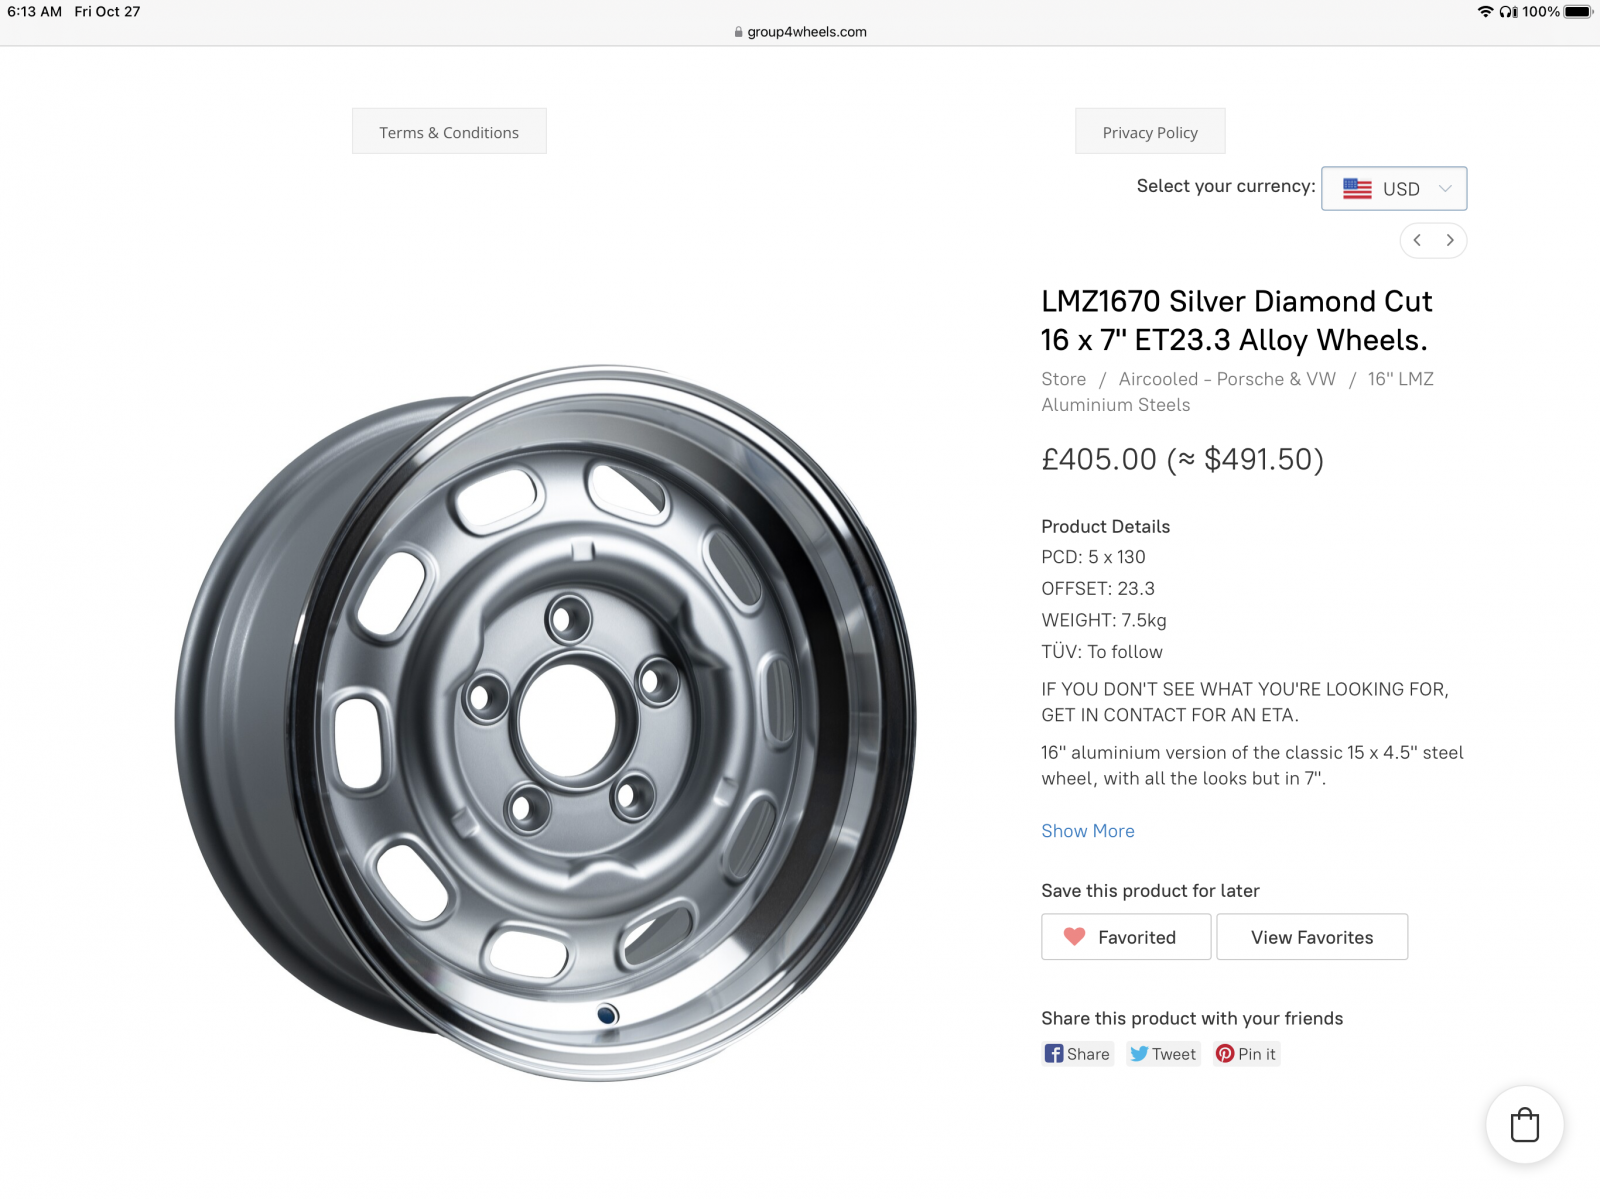 2012 Renault Trafic - Wheel & Tire Sizes, PCD, Offset and Rims